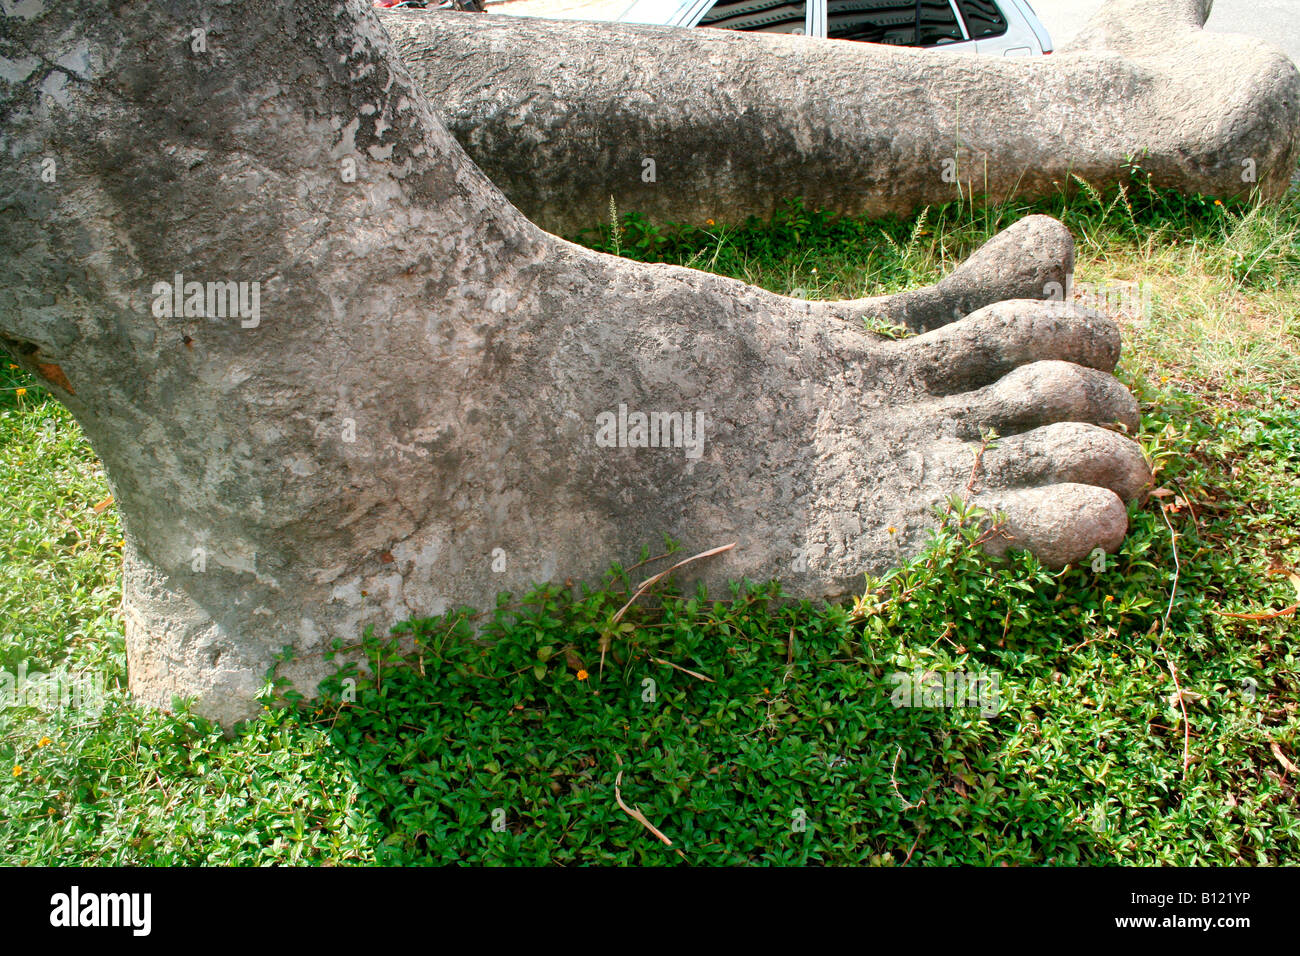 Foot of giant sculpture at Technopark Trivandrum Stock Photo